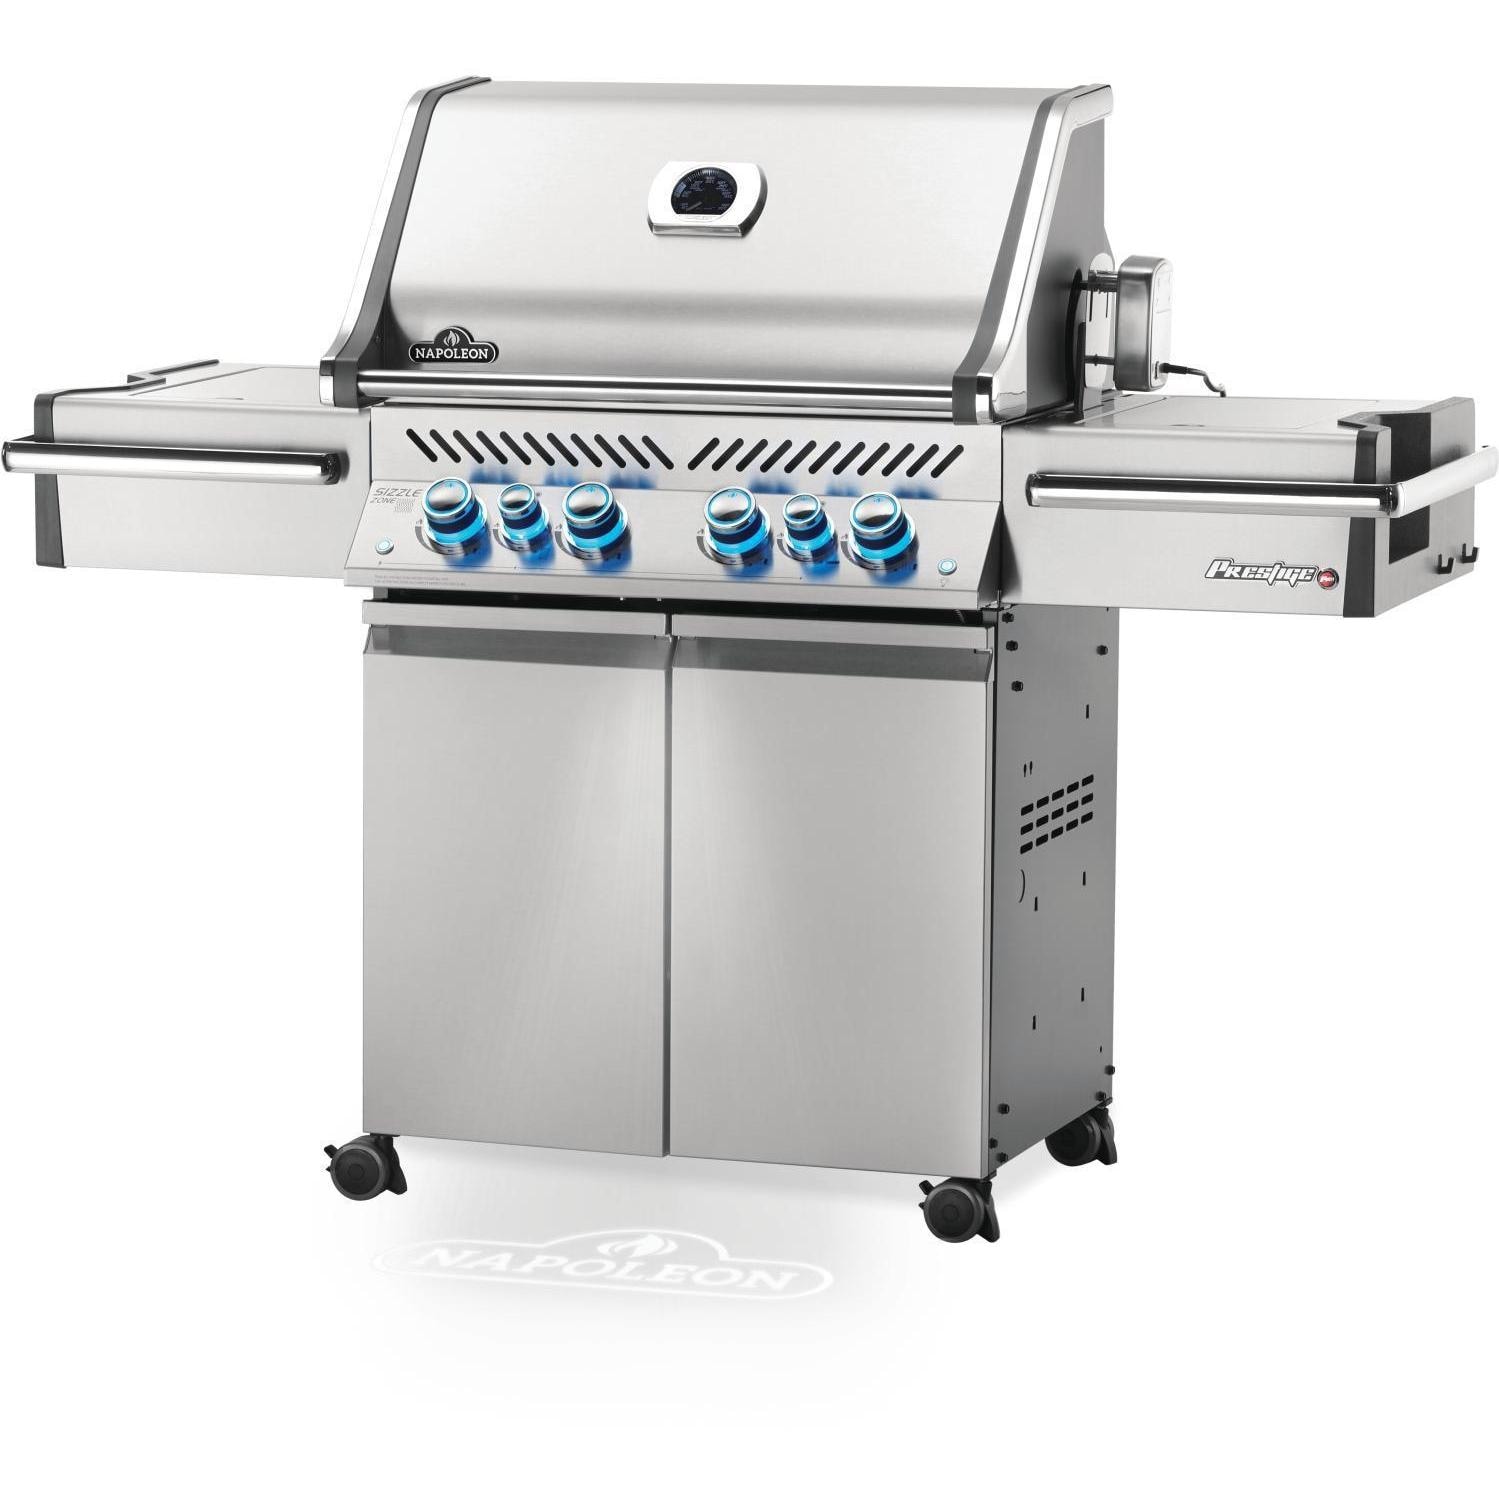 Napoleon Prestige Pro 500 Propane Gas Grill With Infrared Rear Burner And Infrared Side Burners - image 2 of 6